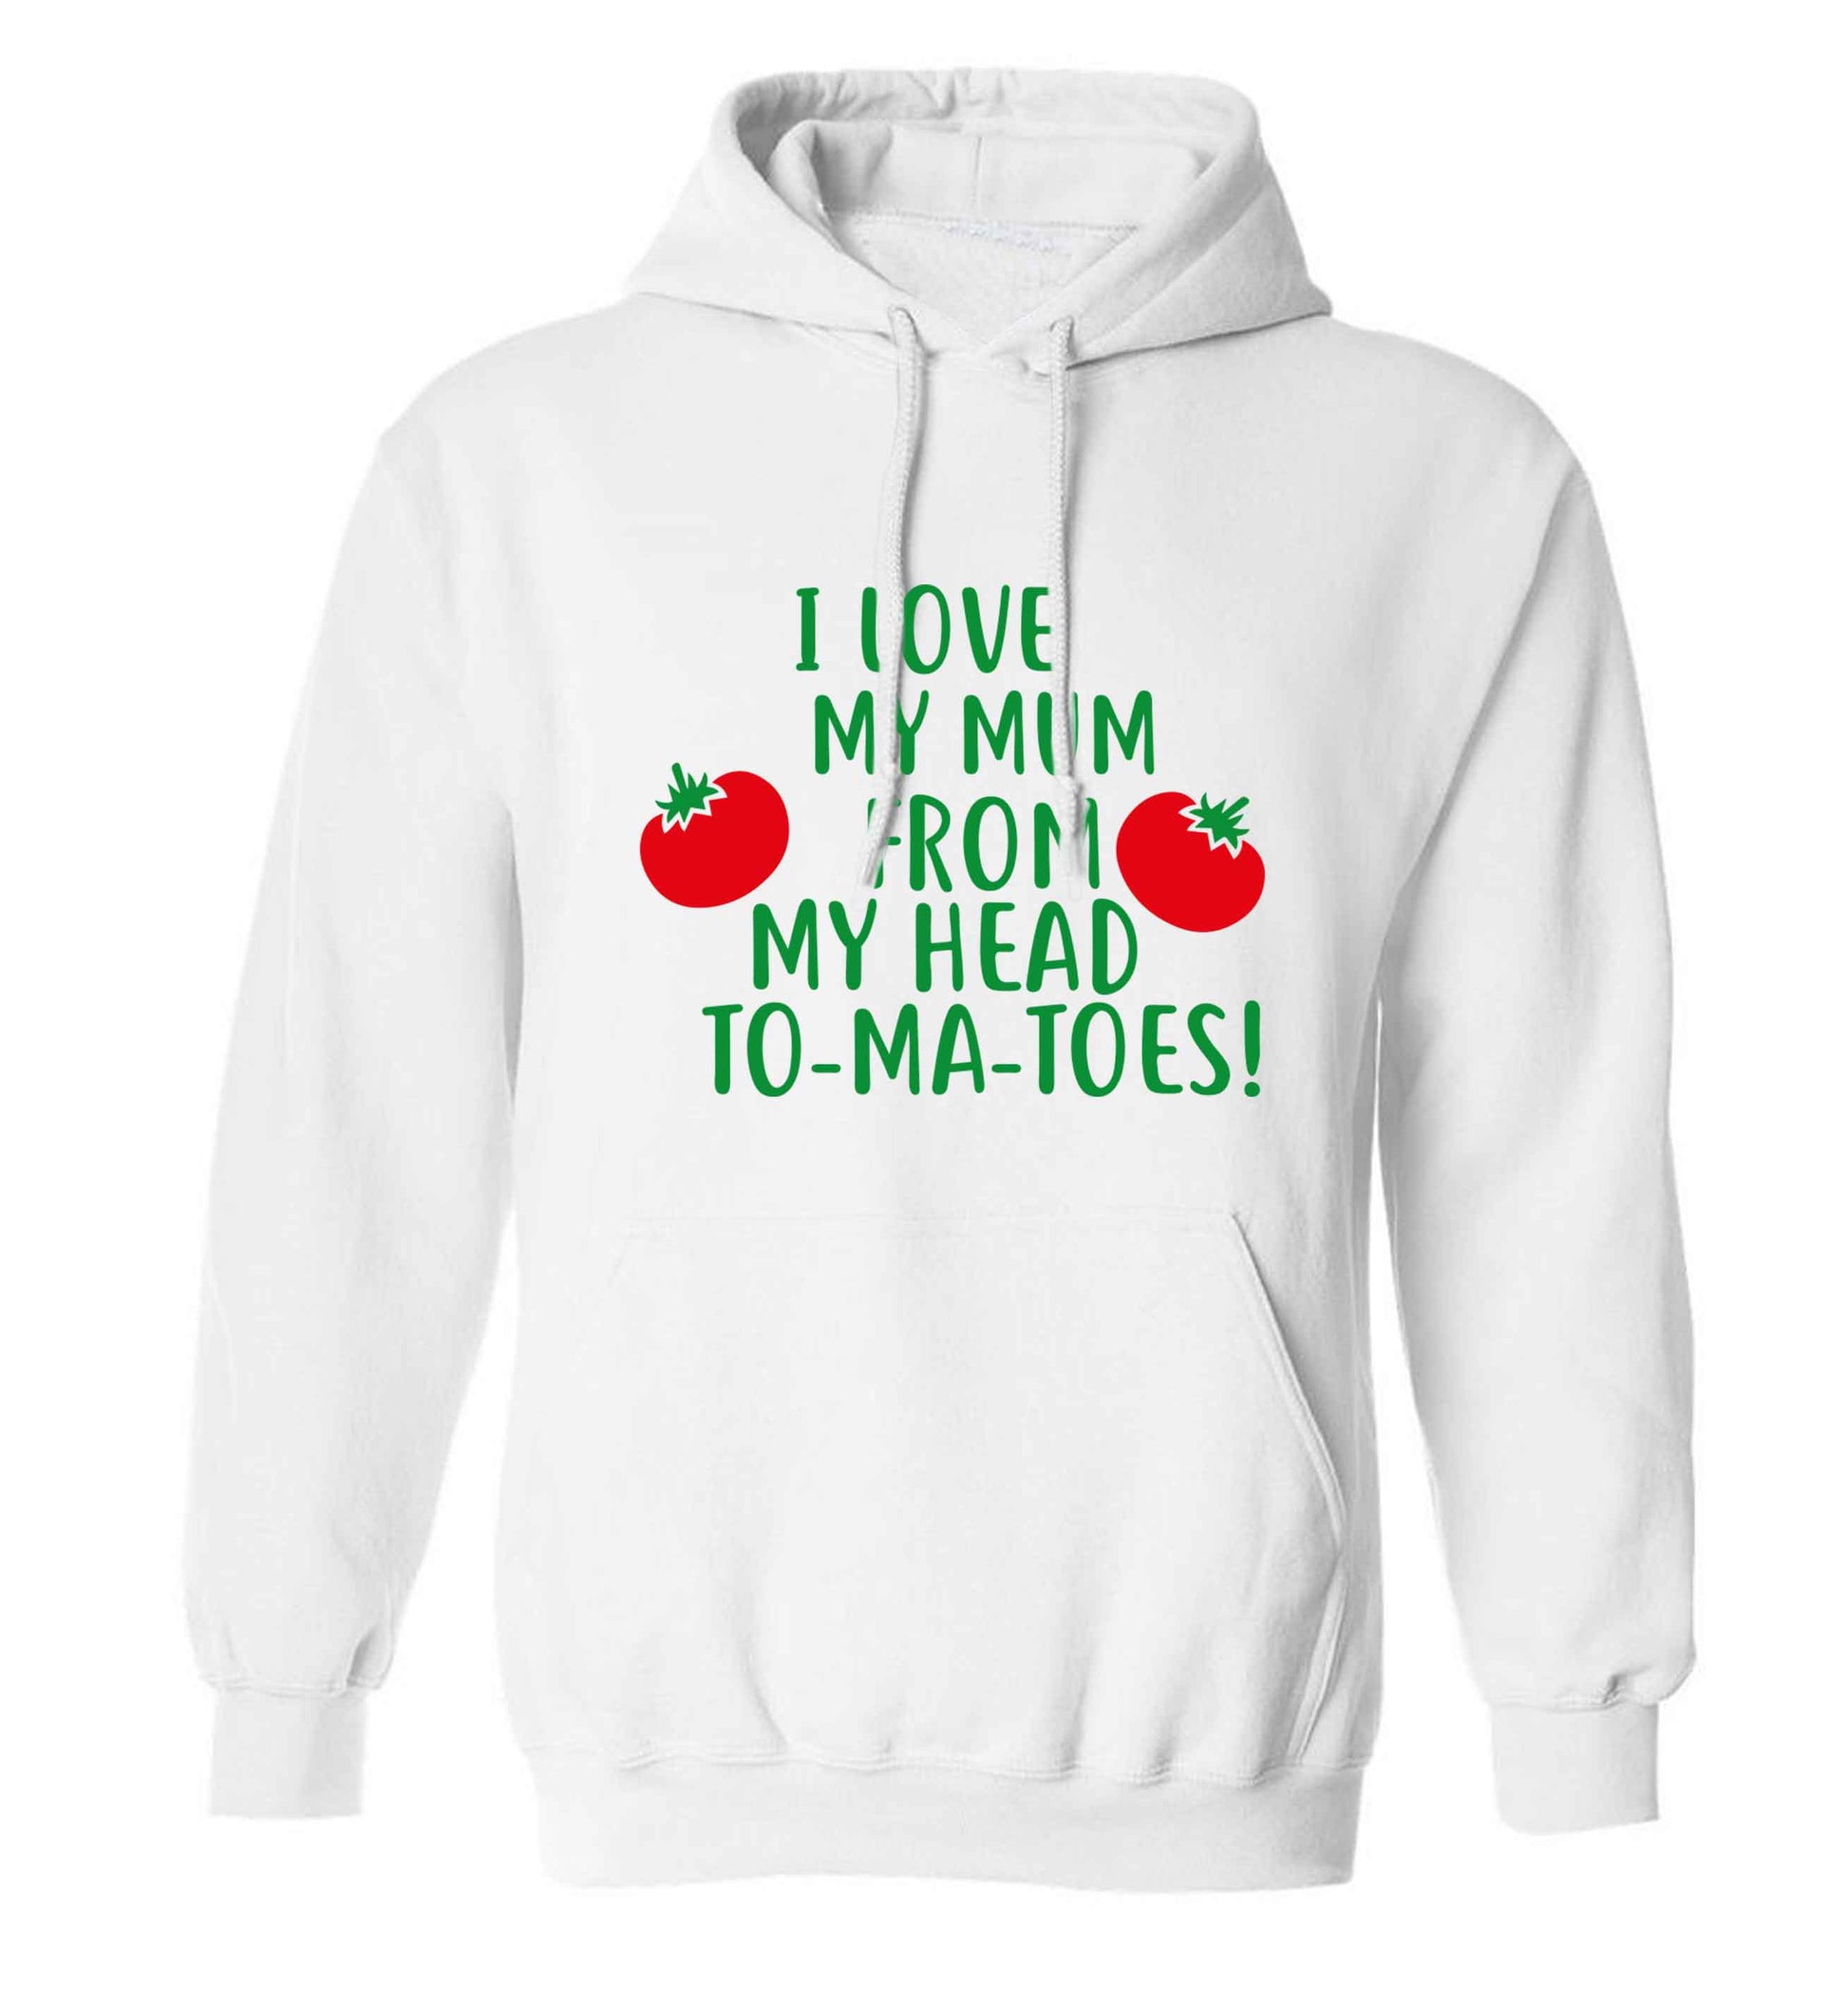 I love my mum from my head to-my-toes! adults unisex white hoodie 2XL